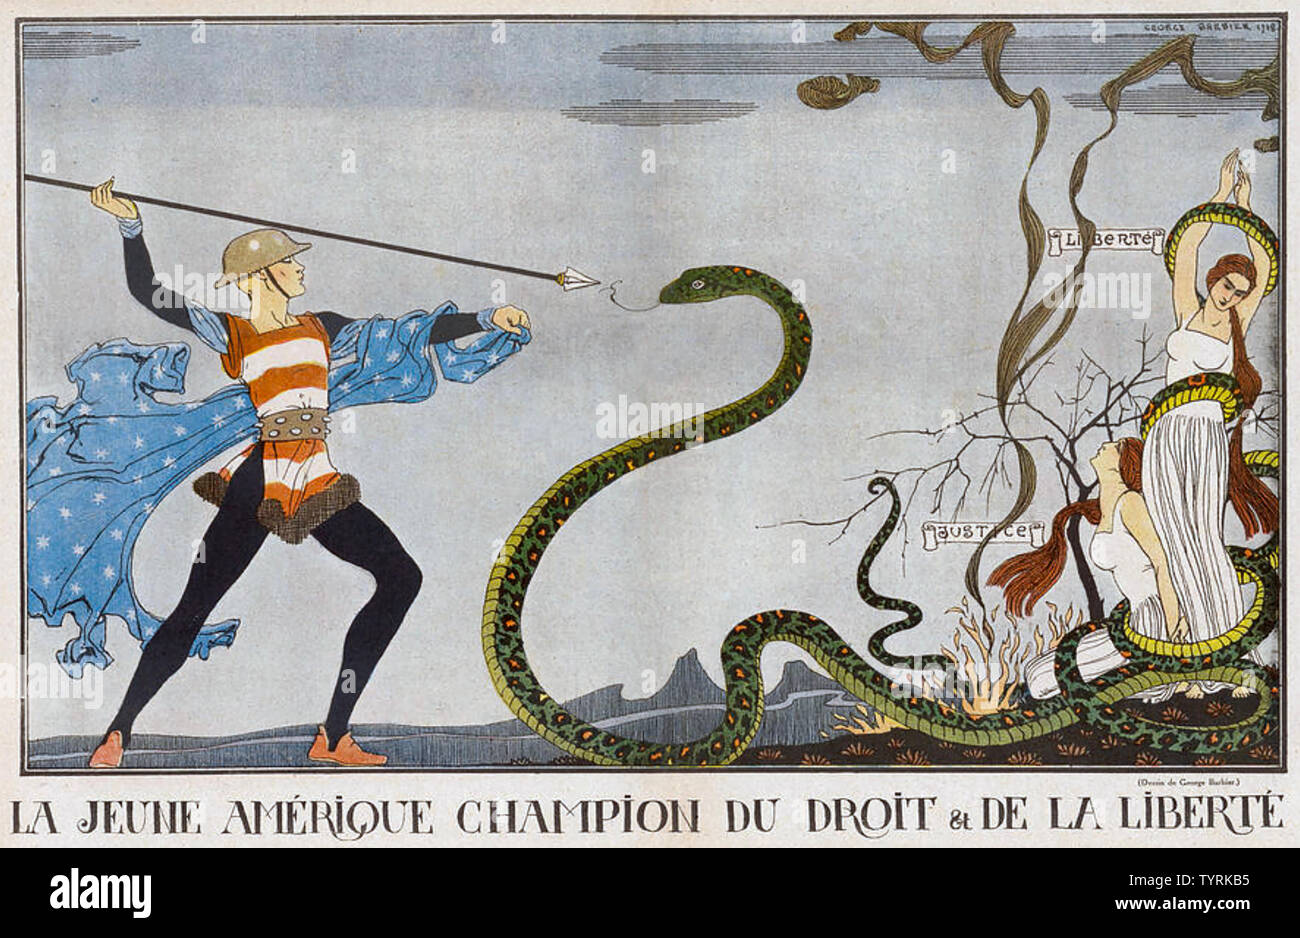 YOIUNG AMERICA RESCUES EUROPE French cartoon of 1918 Stock Photo